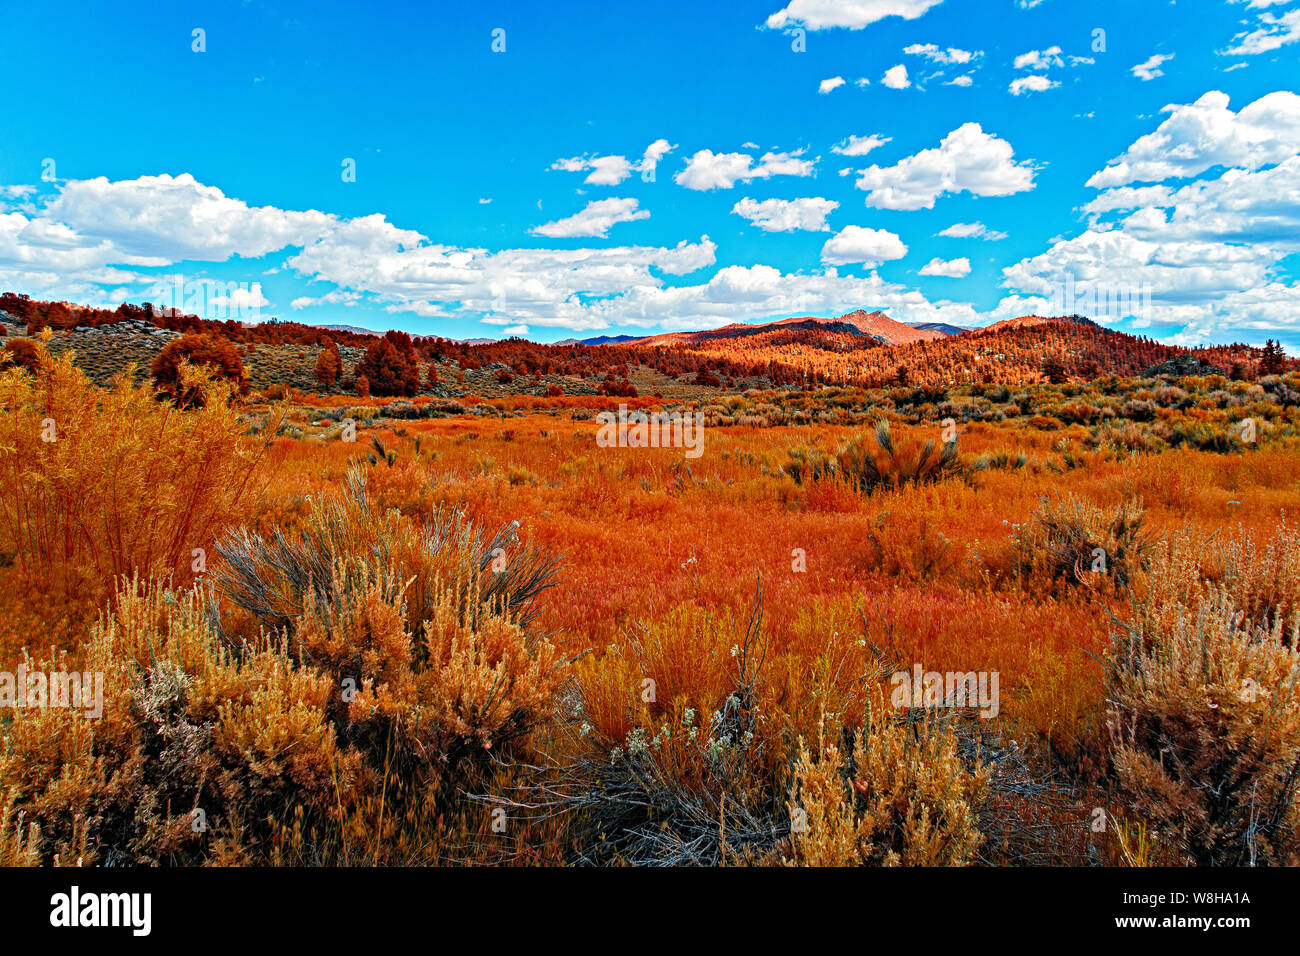 Mountain meadows covered in colorful fall foliage under bright blue sky with white fluffy clouds. Stock Photo